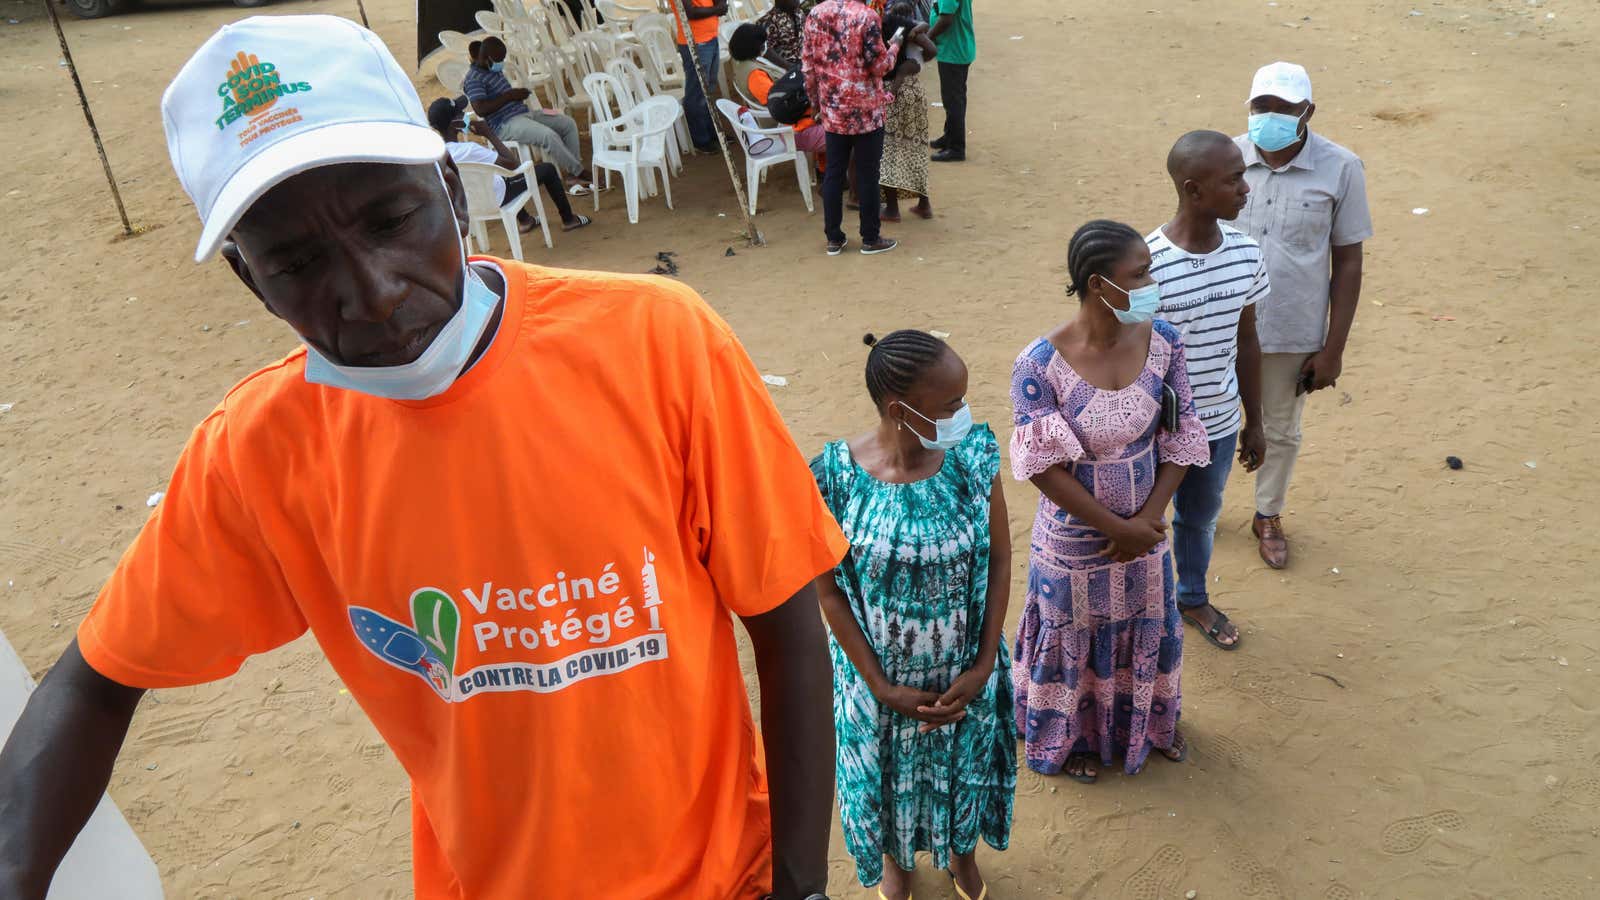 People wait in line to receive a covid-19 vaccine in Abidjan